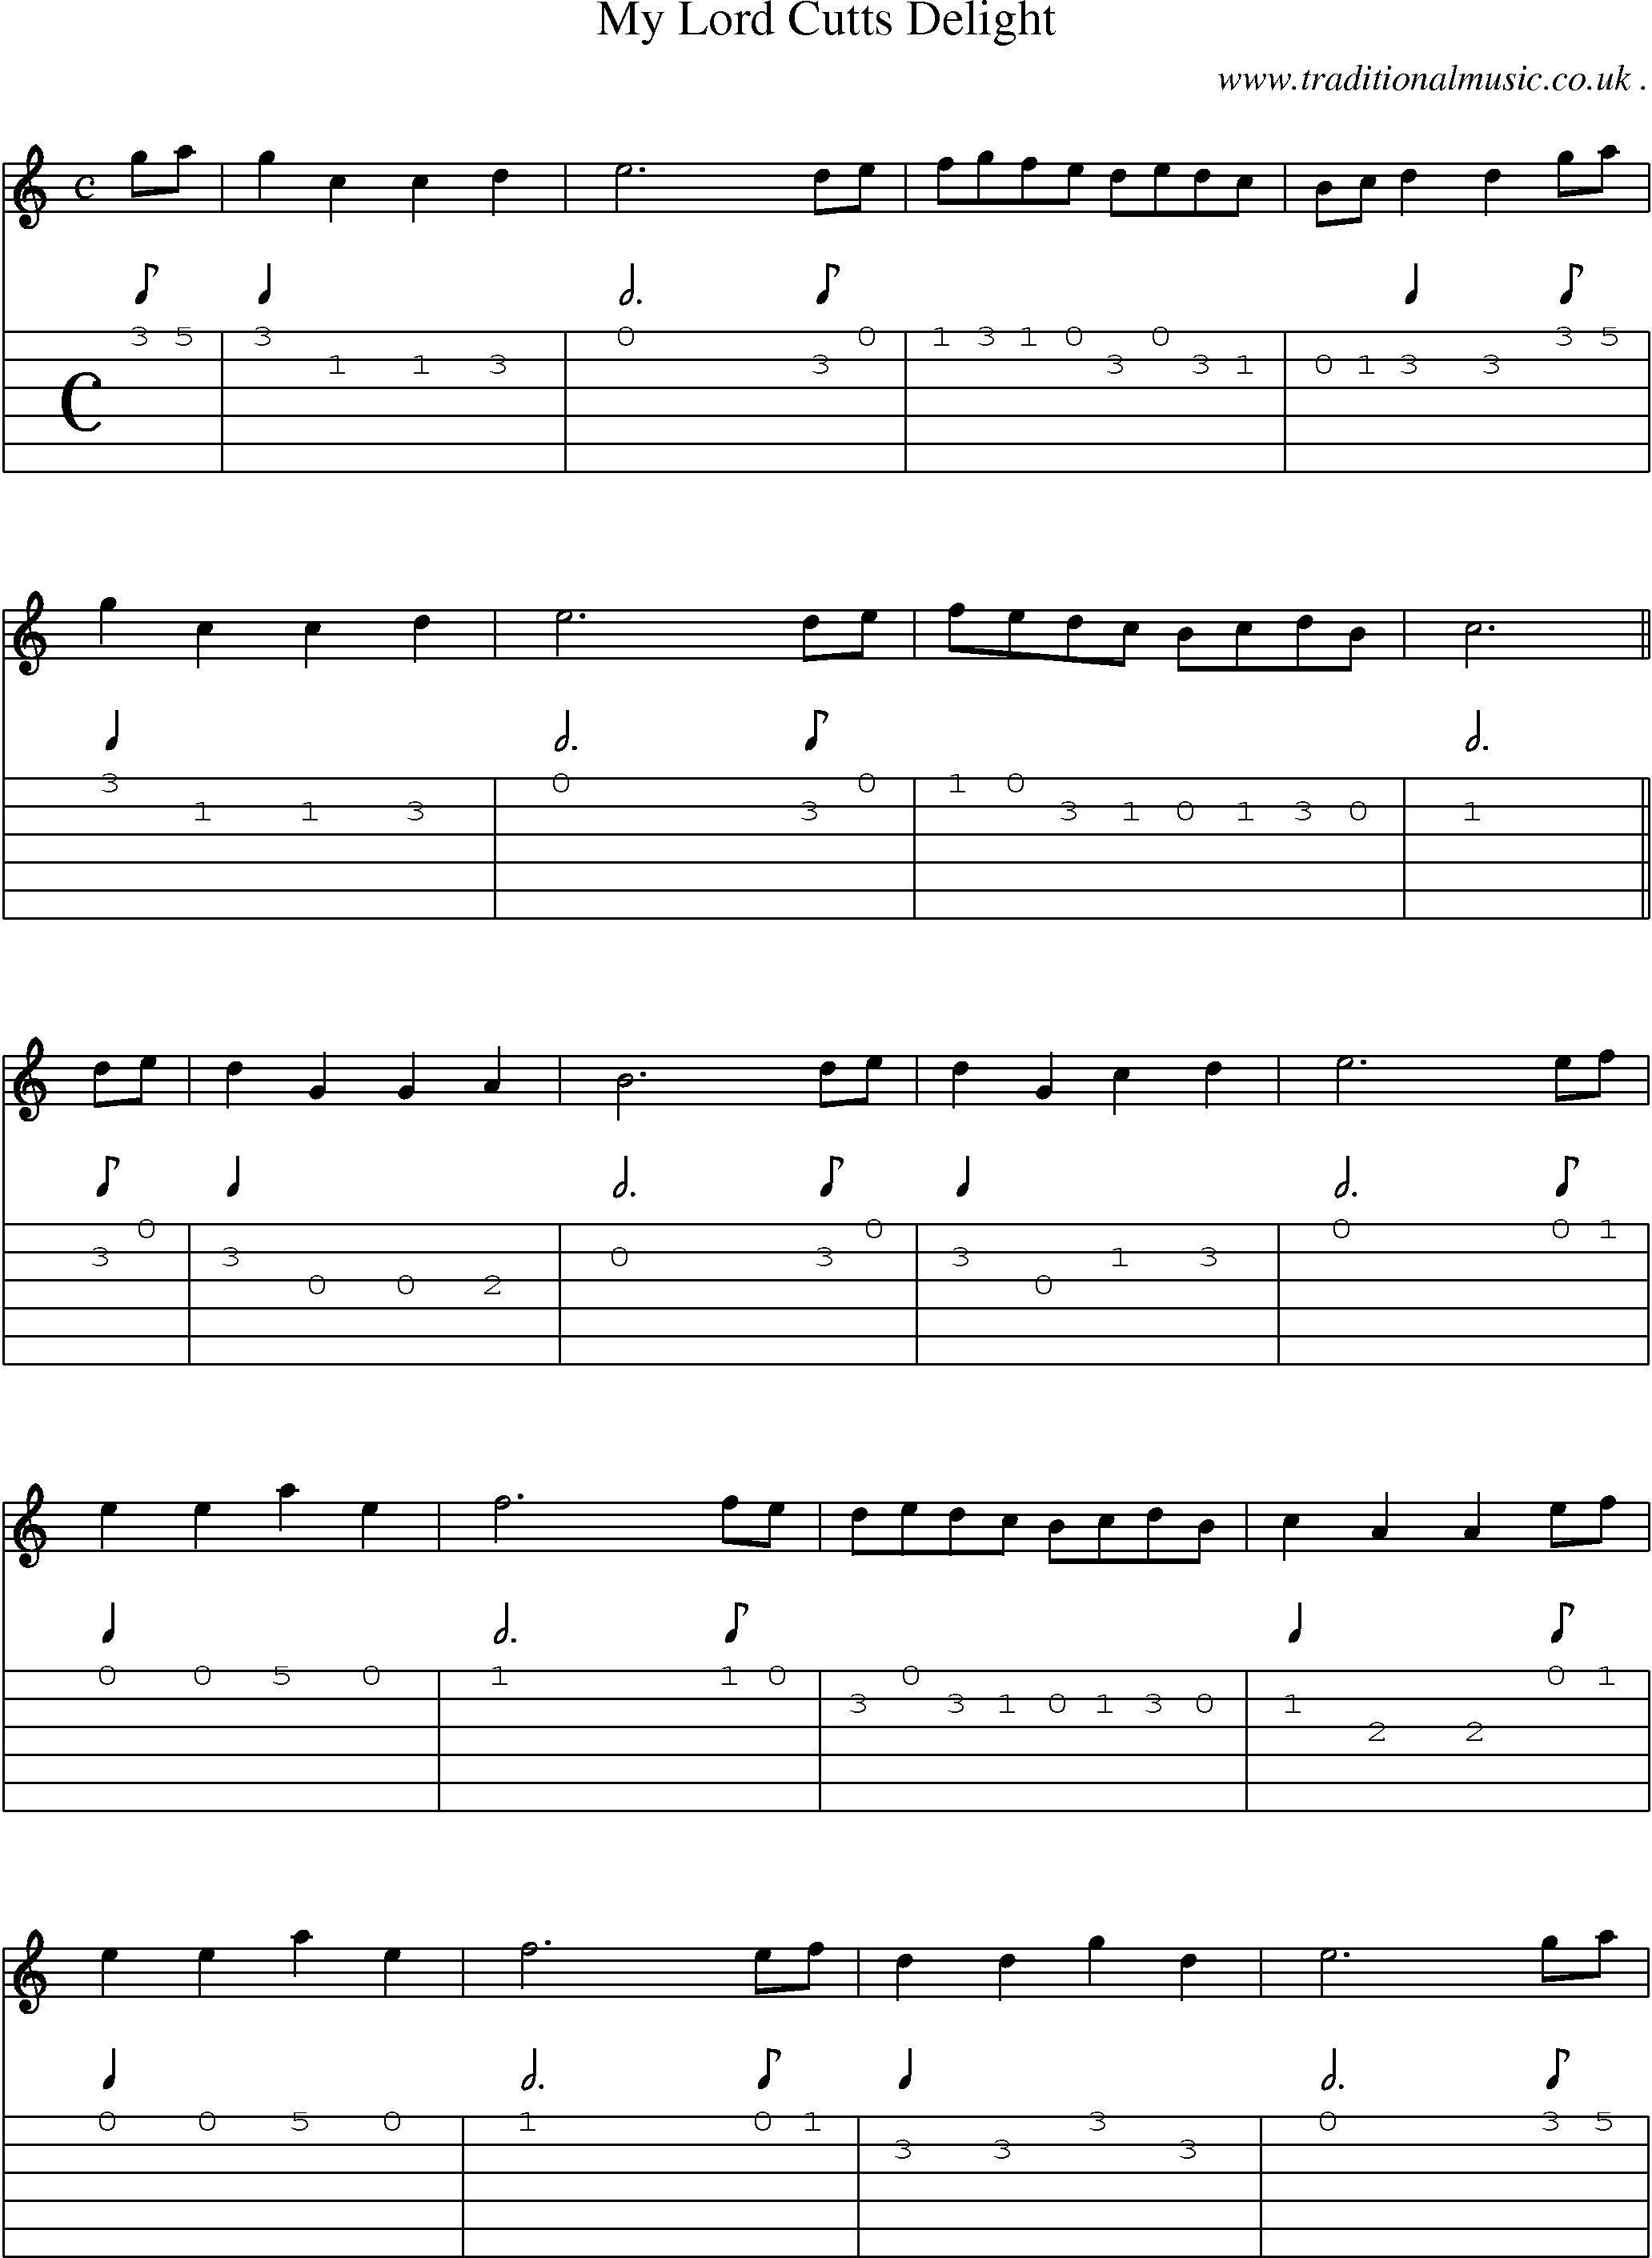 Sheet-Music and Guitar Tabs for My Lord Cutts Delight